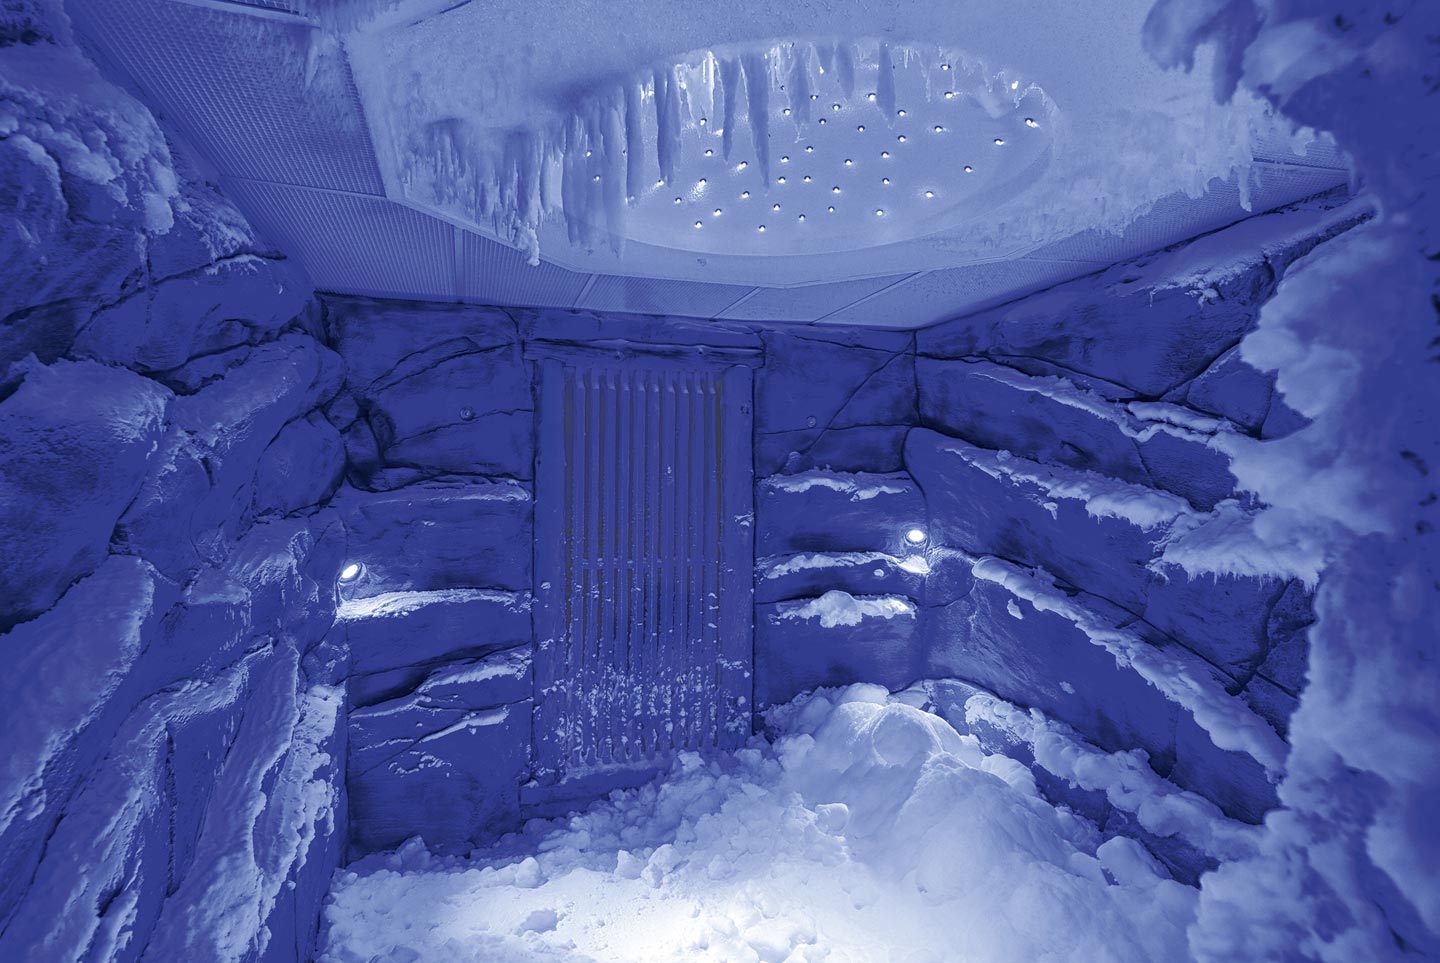 The unique ice room of La Datcha, with snow at the bottom and ice covering the walls.